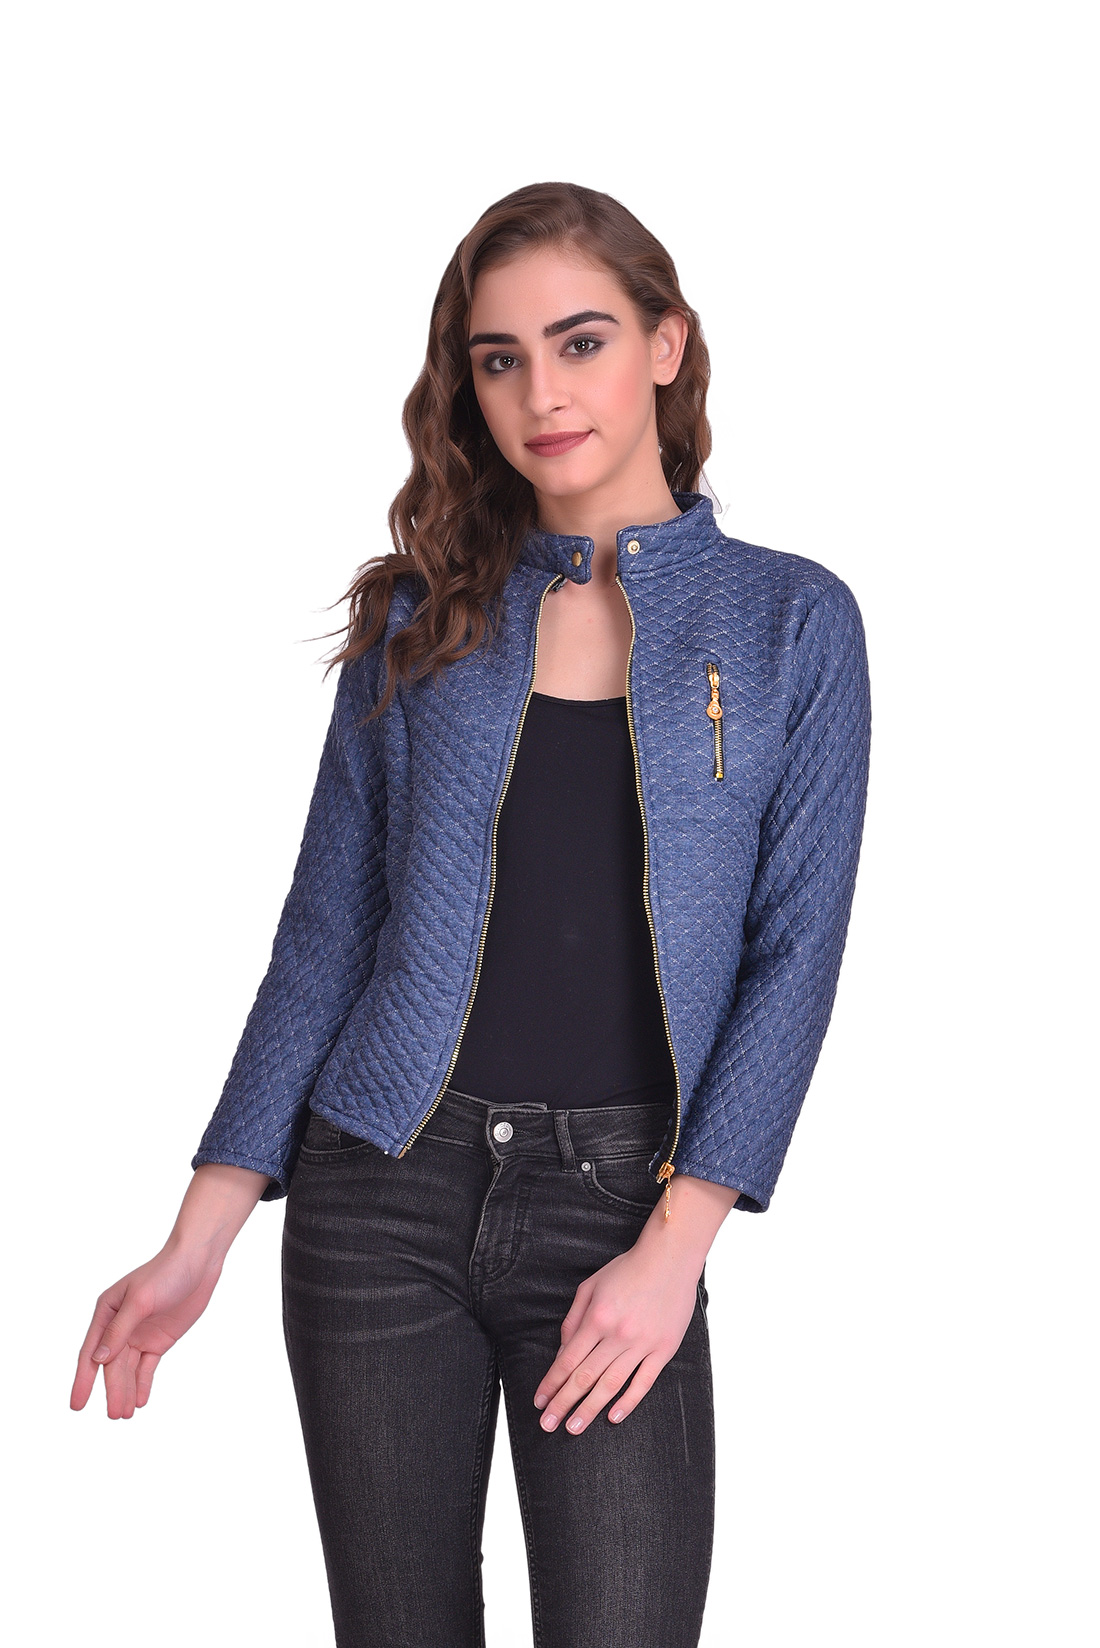 Buy Westrobe Women Light Blue Quilted jacket Online @ ₹799 from ShopClues